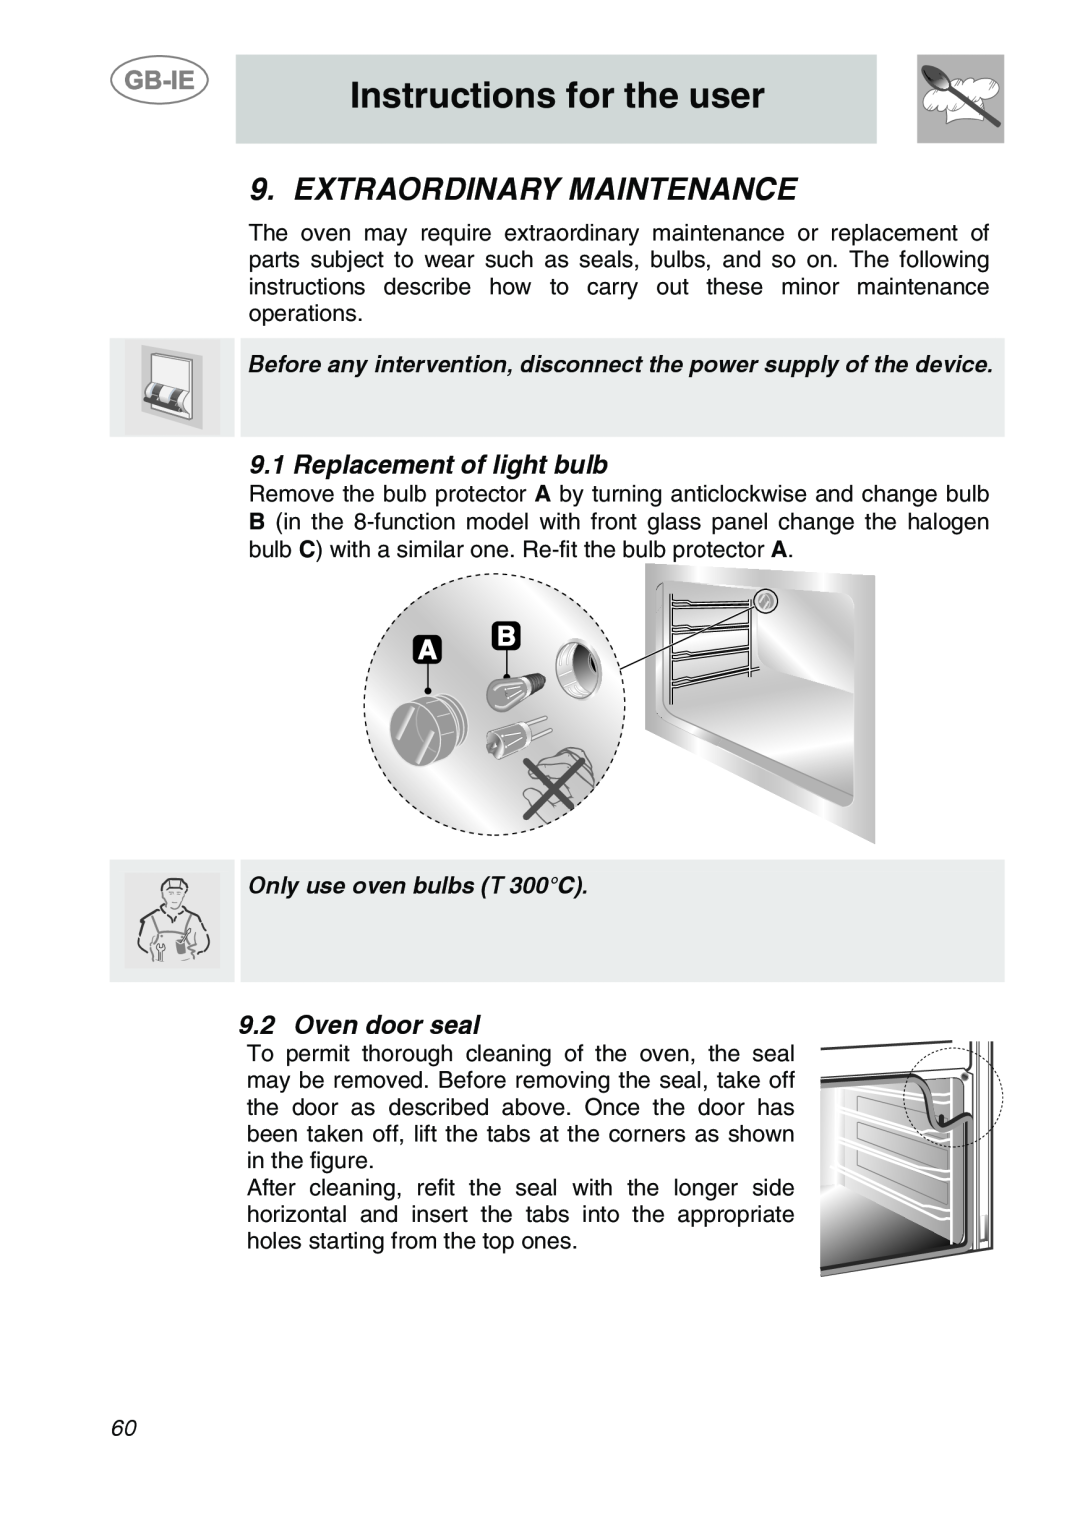 Smeg SC166PZ manual Extraordinary Maintenance, Replacement of light bulb, Oven door seal, Instructions for the user 